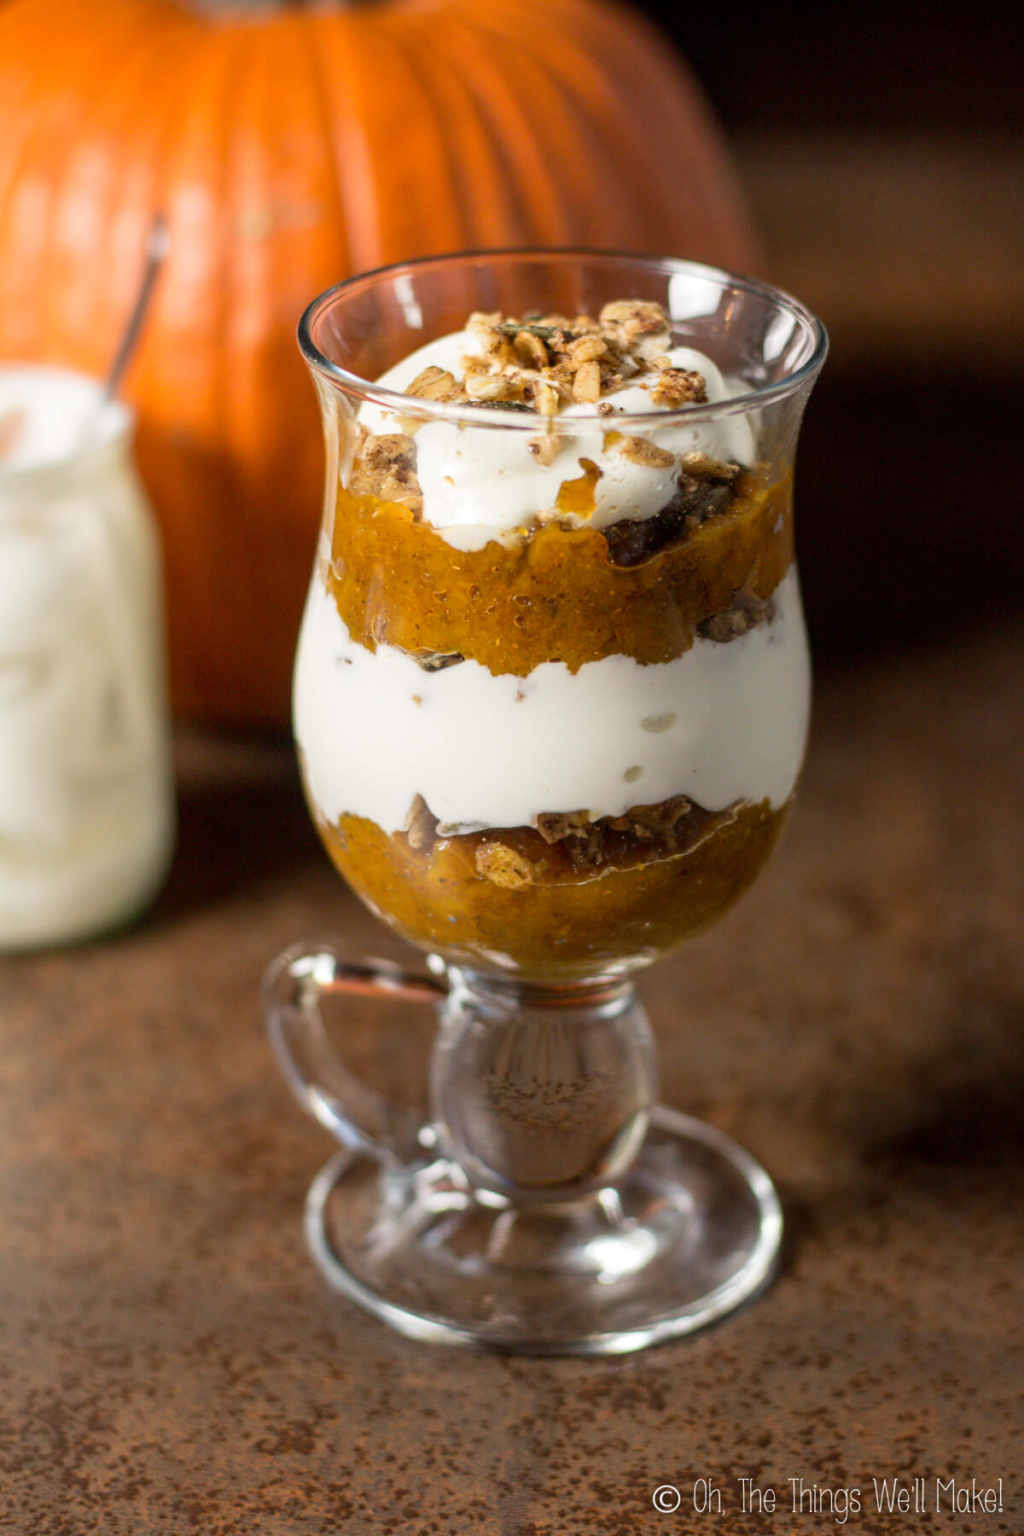 A glass full of pumpkin layered dessert of pumpkin puree and yogurt, topped off with chopped pecans. This glass is place in front of an orange pumpkin and a yogurt container.